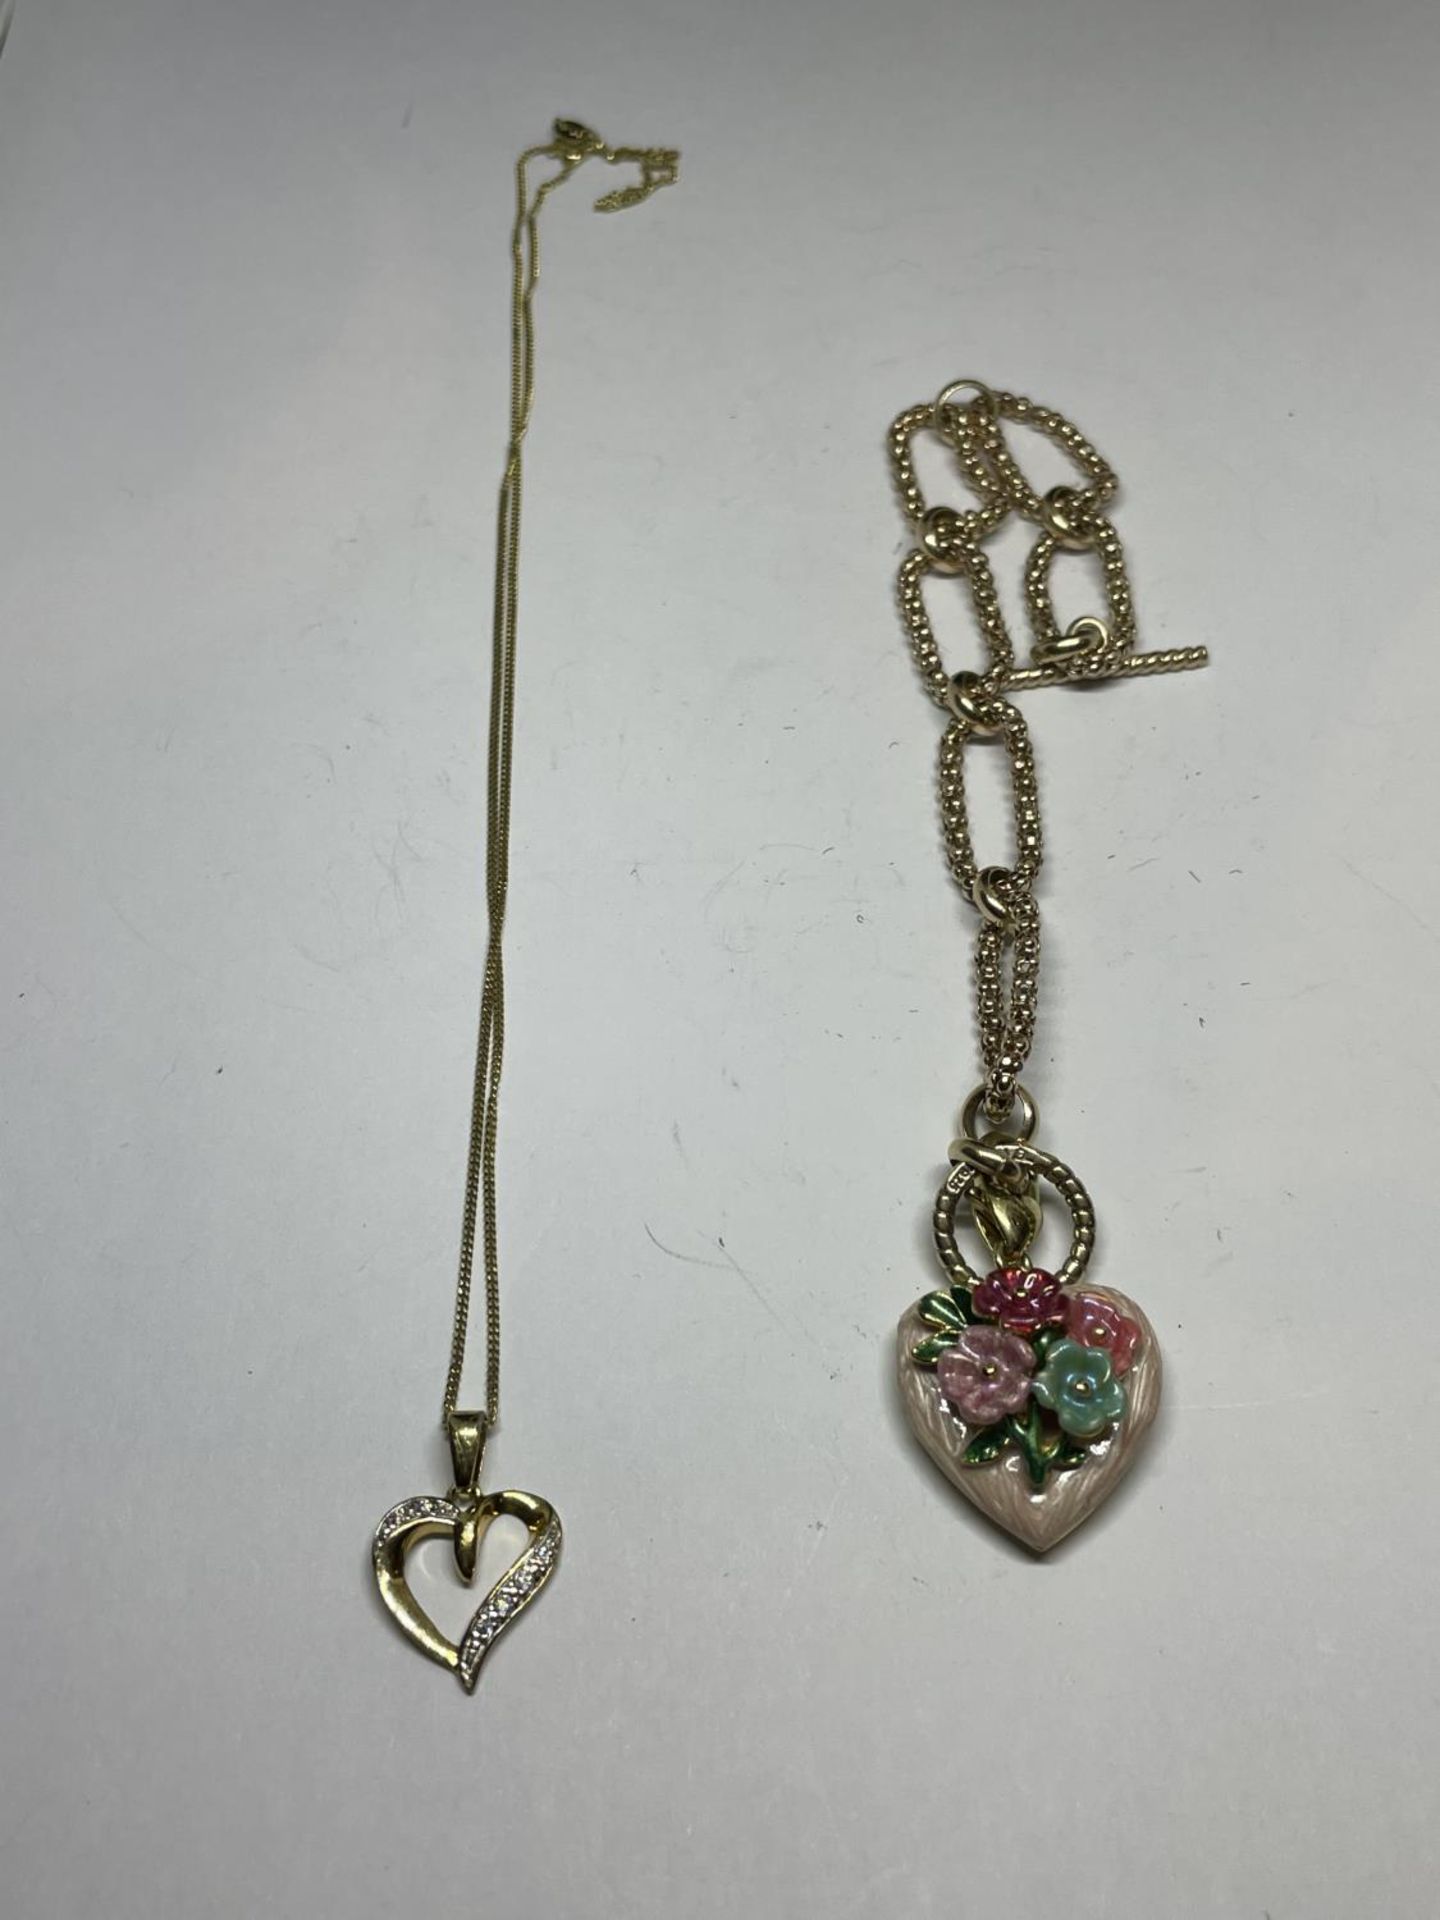 TWO SILVER GILT ITEMS TO INCLUDE A NECKLACE WITH PENDANT AND A BRACELET